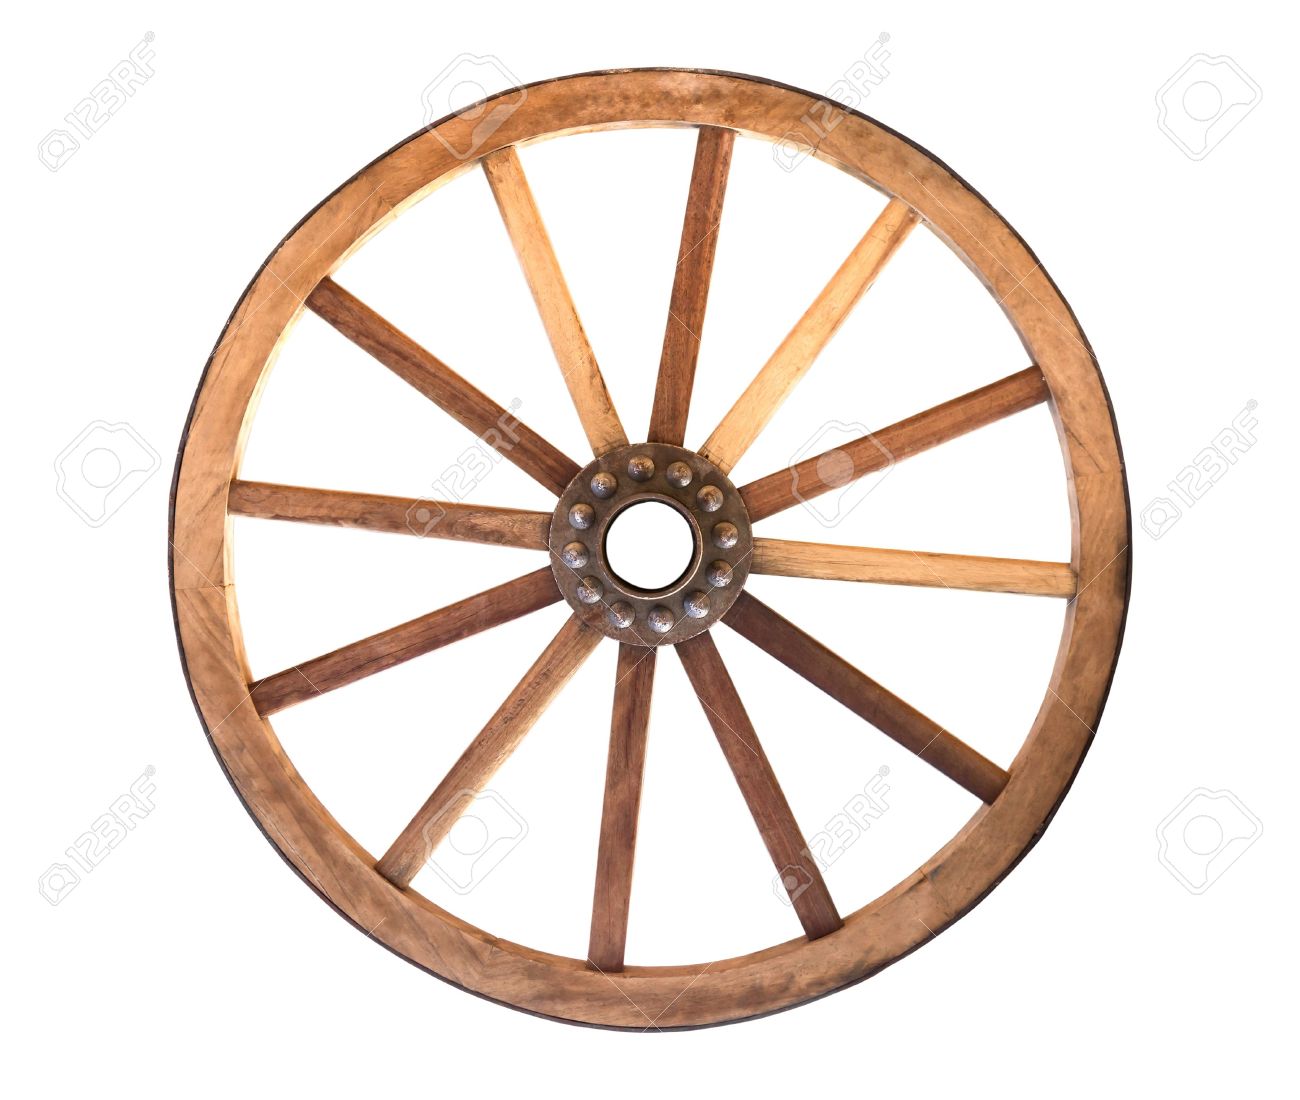 17978905-Wooden-cartwheel-from-a-wagon-on-a-white-background-Stock-Photo.jpg